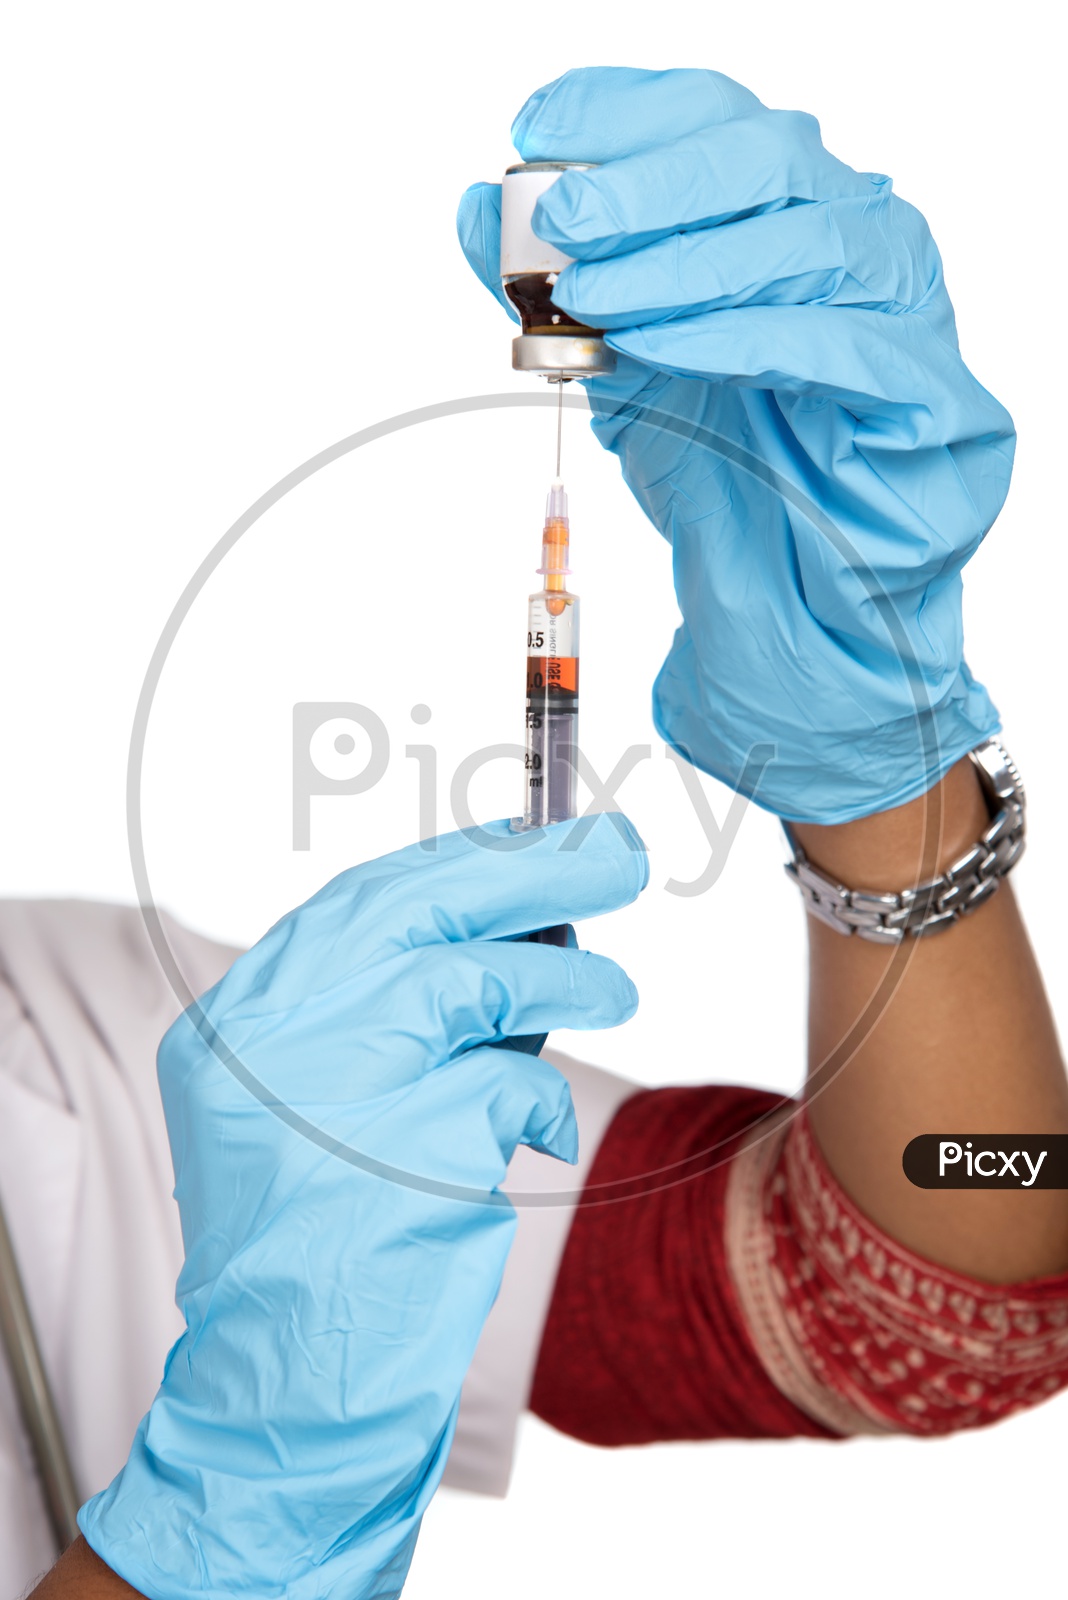 Indian Female Doctor loading a syringe from vial